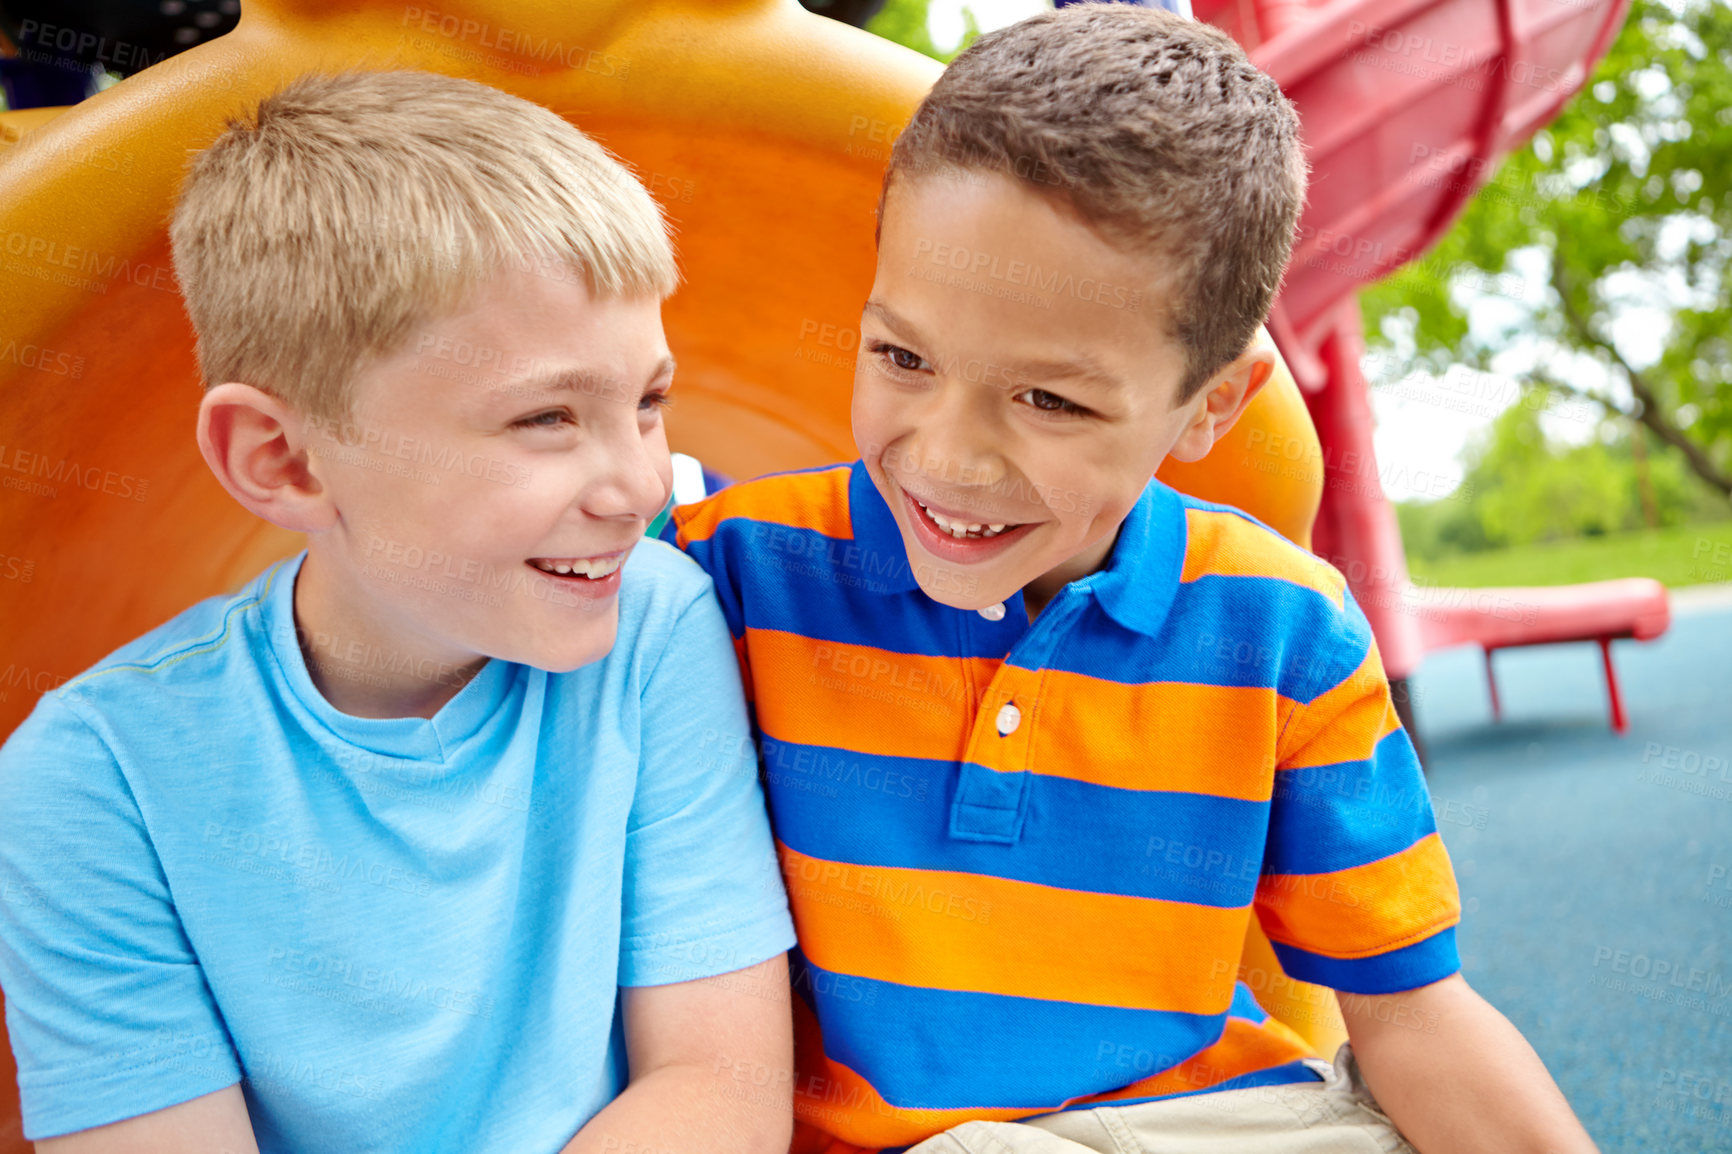 Buy stock photo Two happy young boys sitting on a slide in a play park